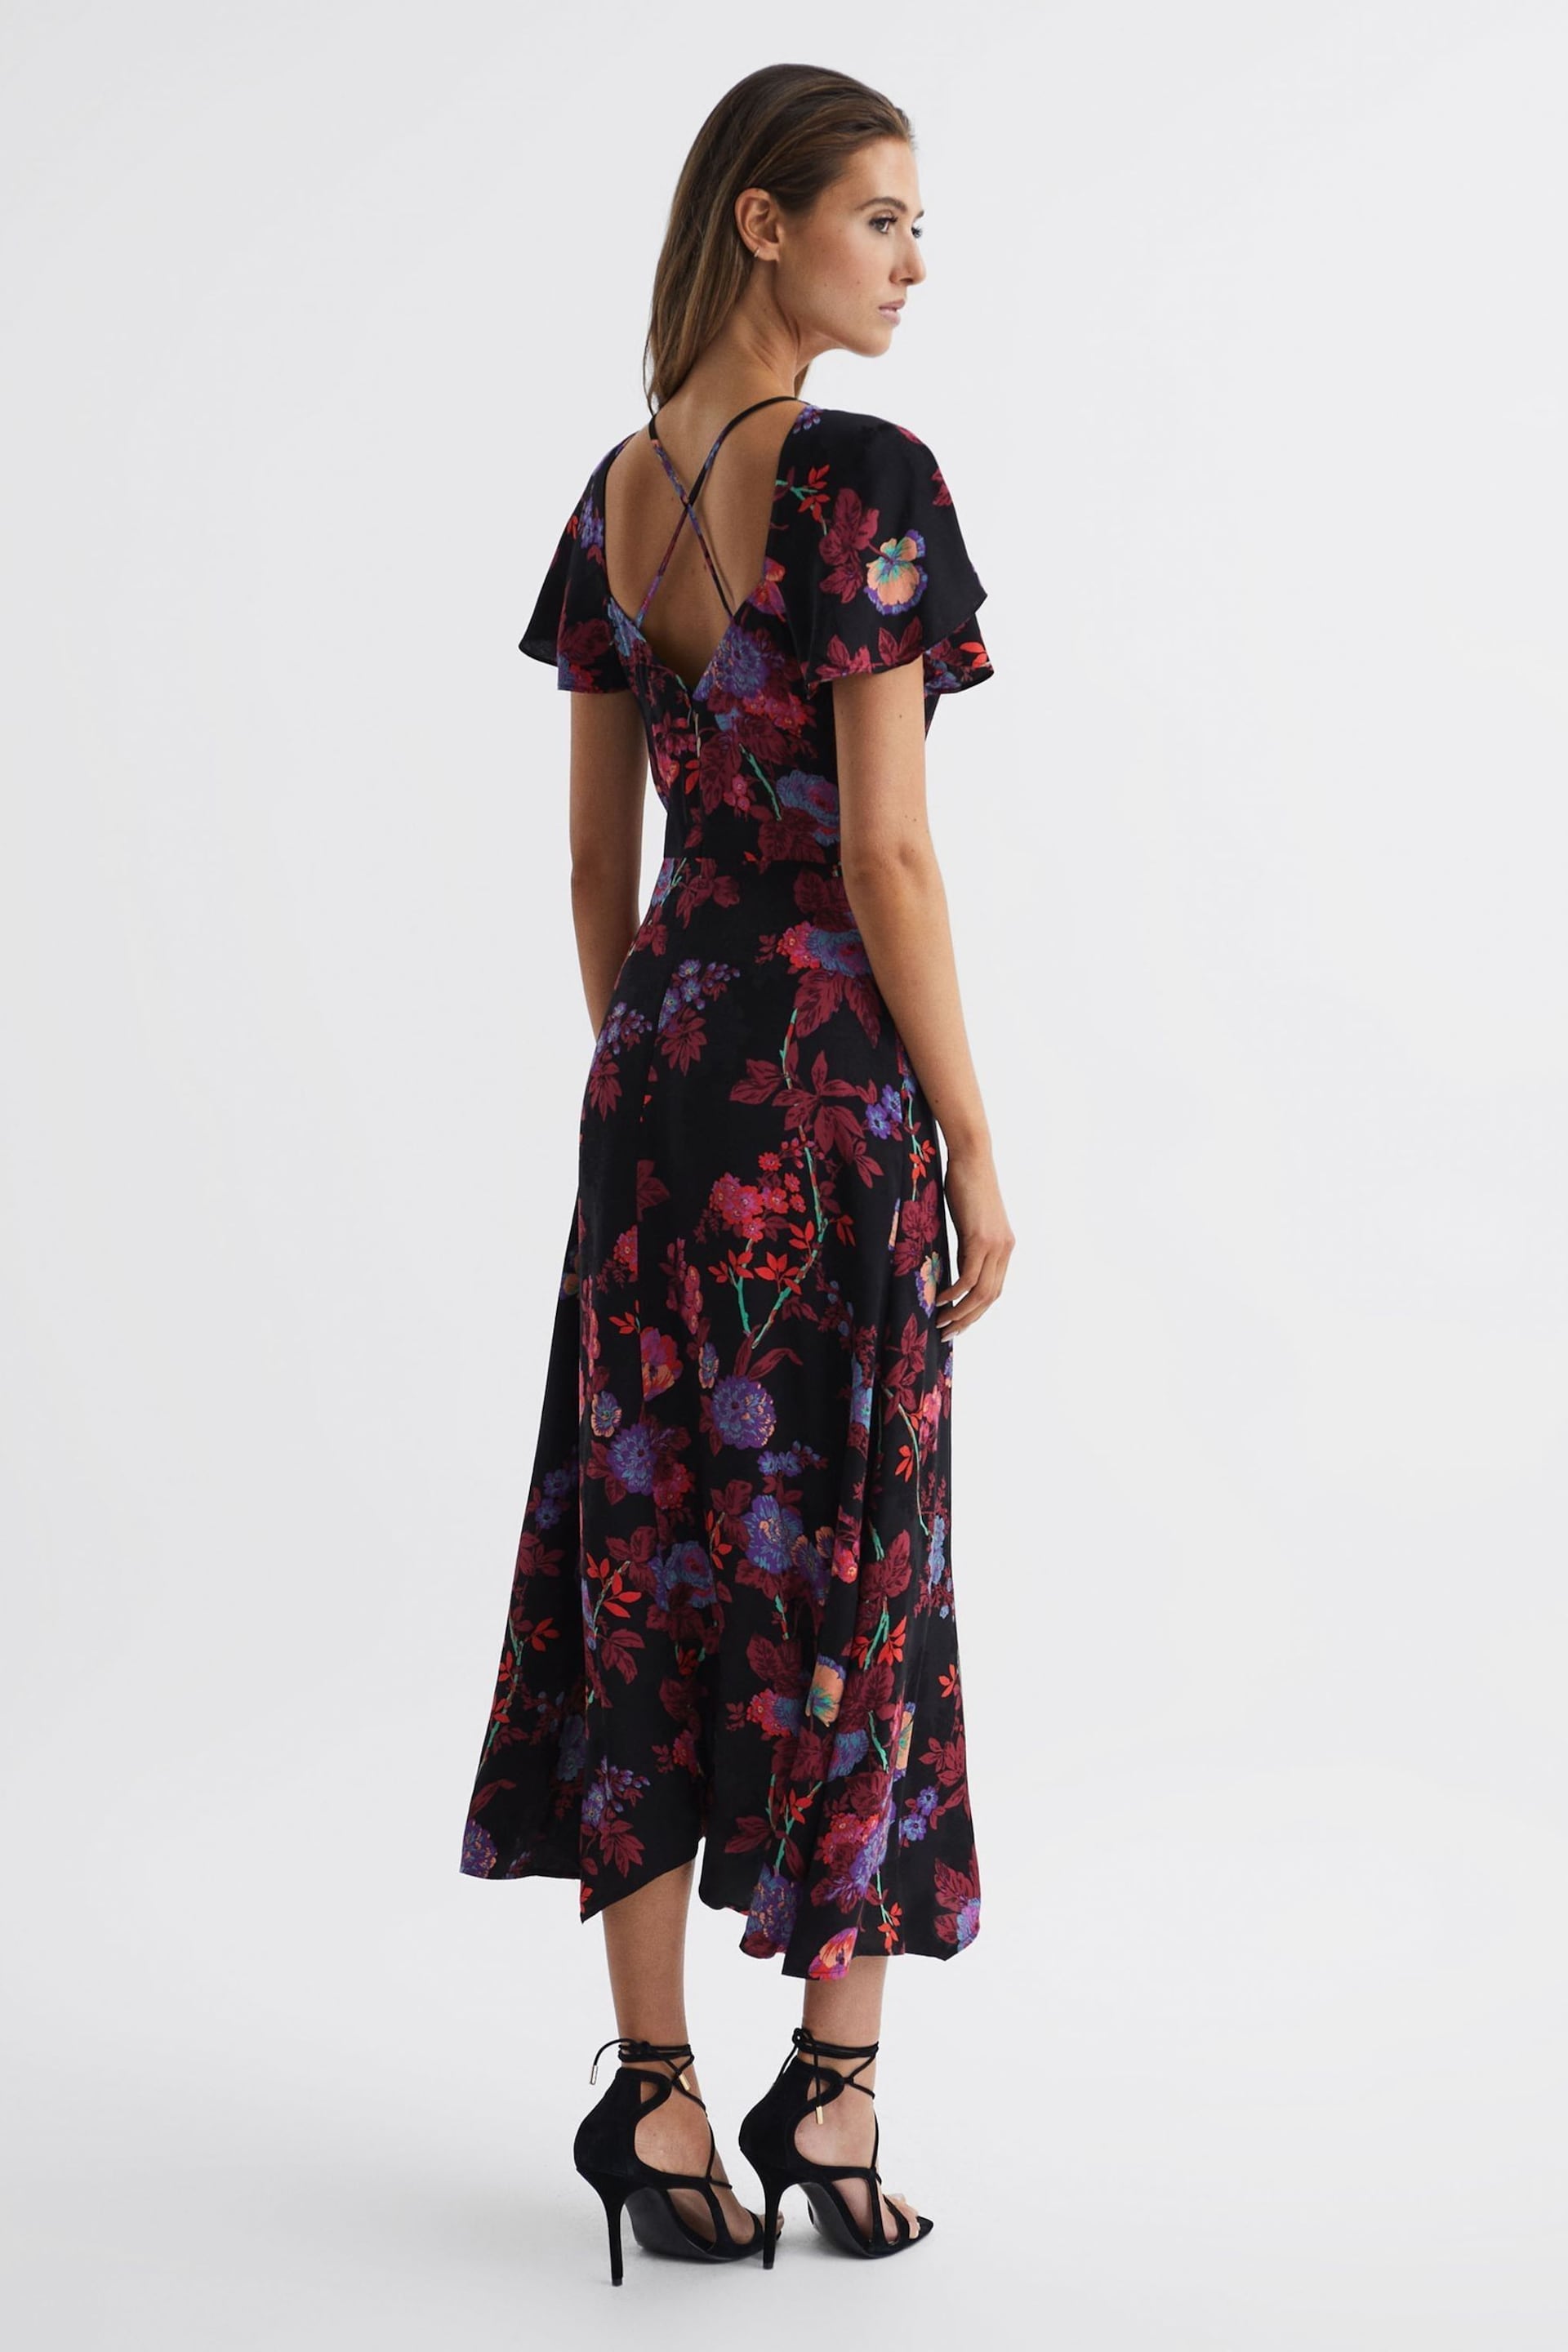 Reiss Black/Pink Leni Fitted Floral Print Midi Dress - Image 5 of 7